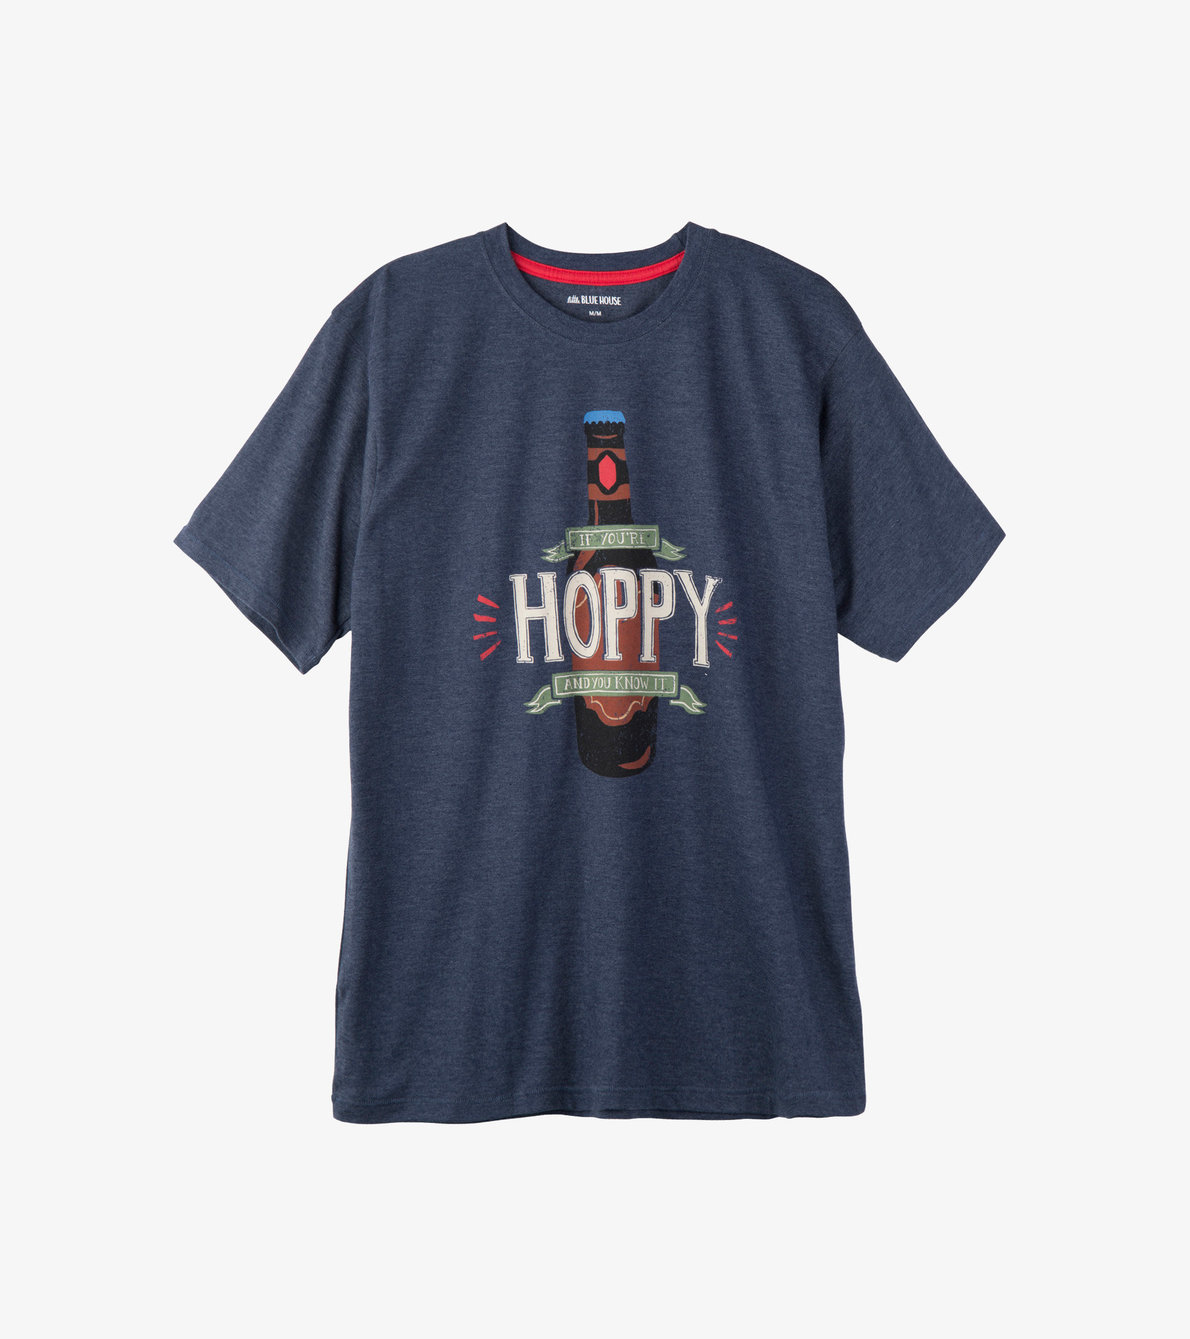 View larger image of If You're Hoppy And You Know It Men's Tee